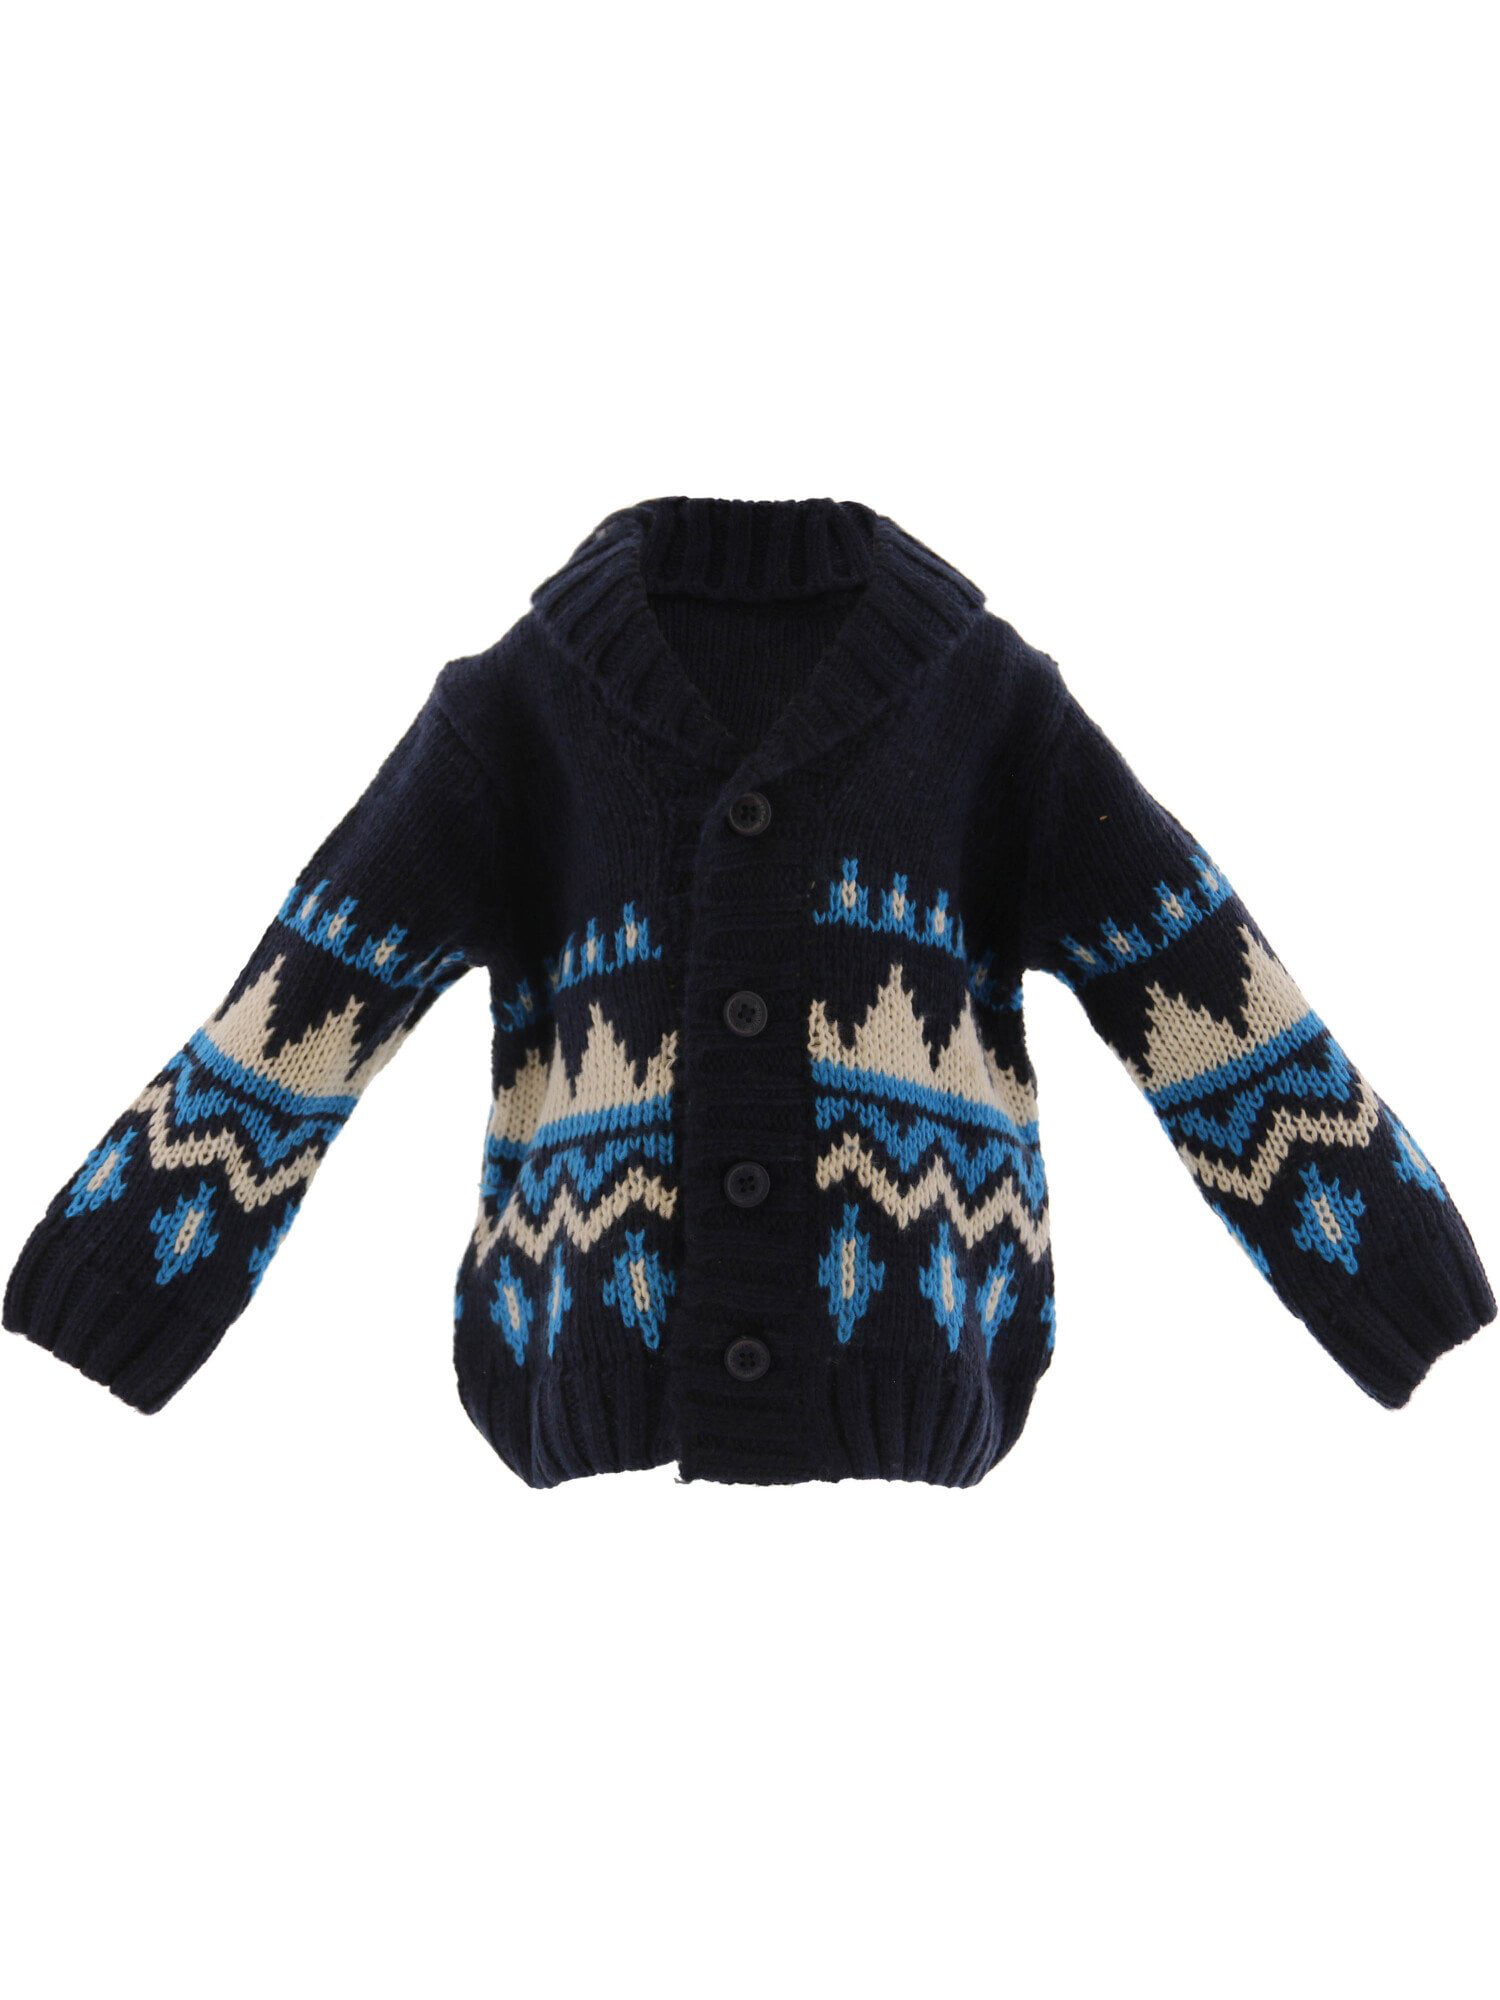 Details about  / Janie And Jack Fair Isle Shawl Cardigan Sweater